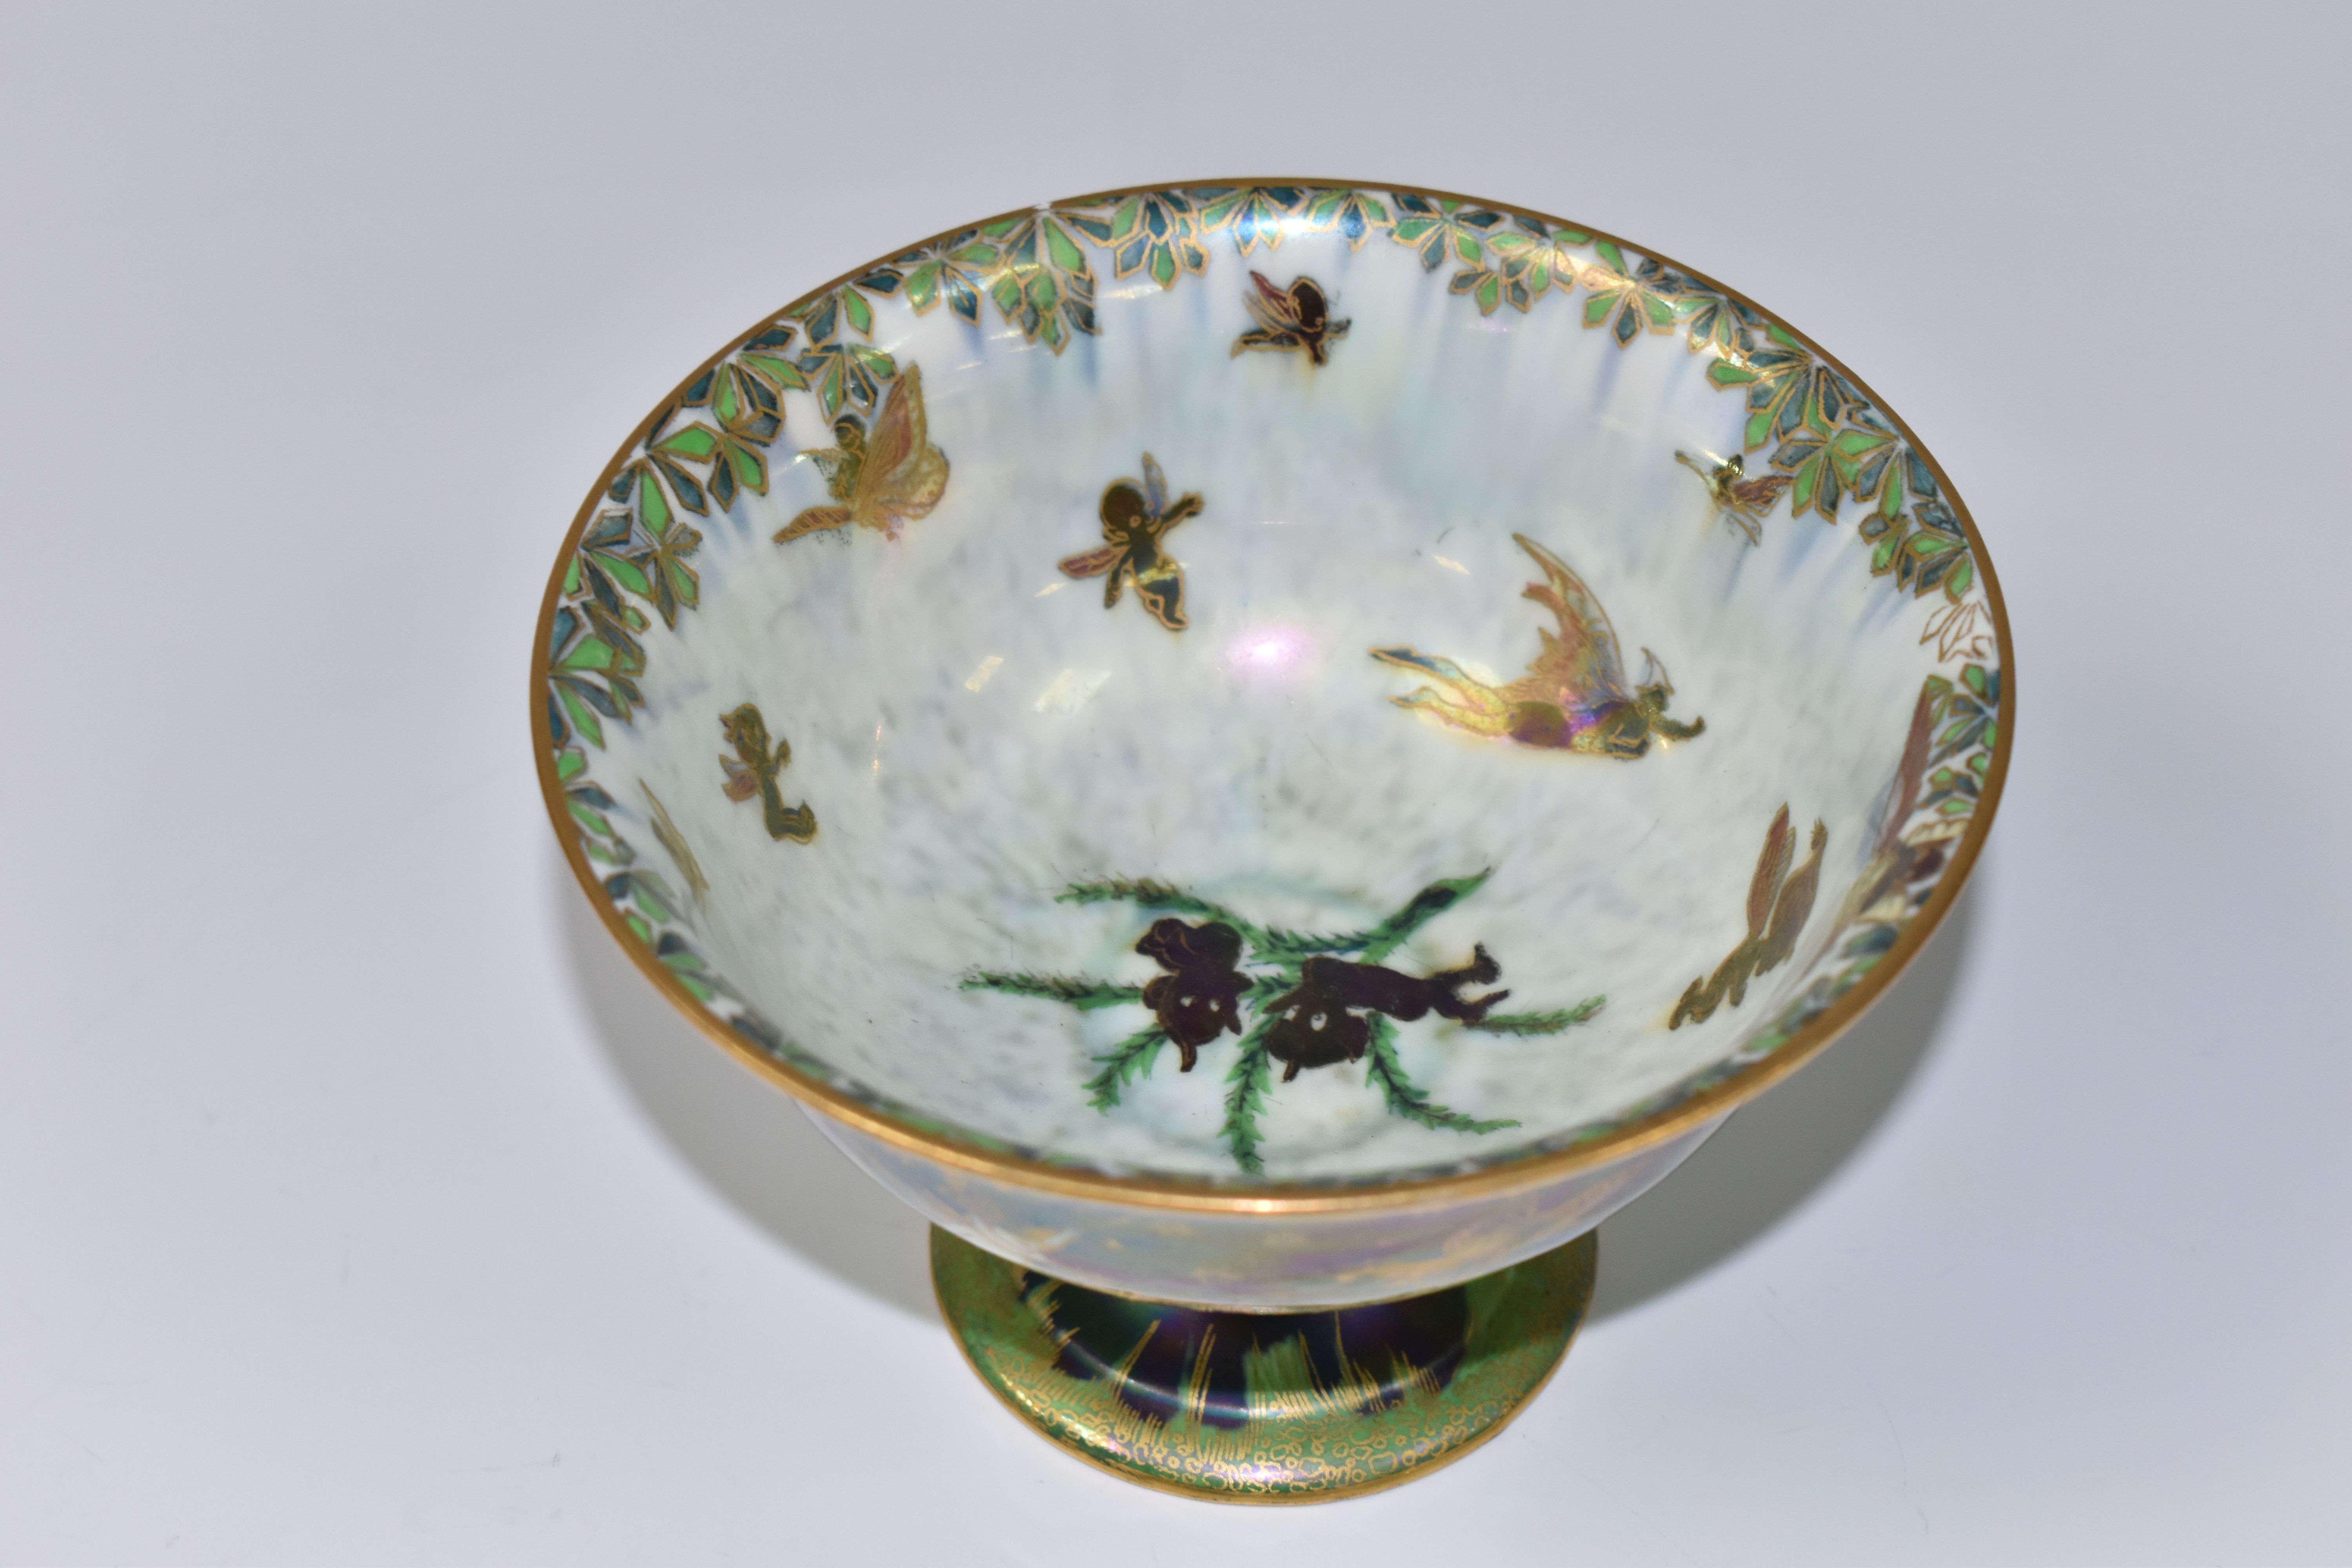 A WEDGWOOD FAIRYLAND LUSTRE FOOTED BOWL, decorated with a mother of pearl lustre with fairies in - Image 4 of 9